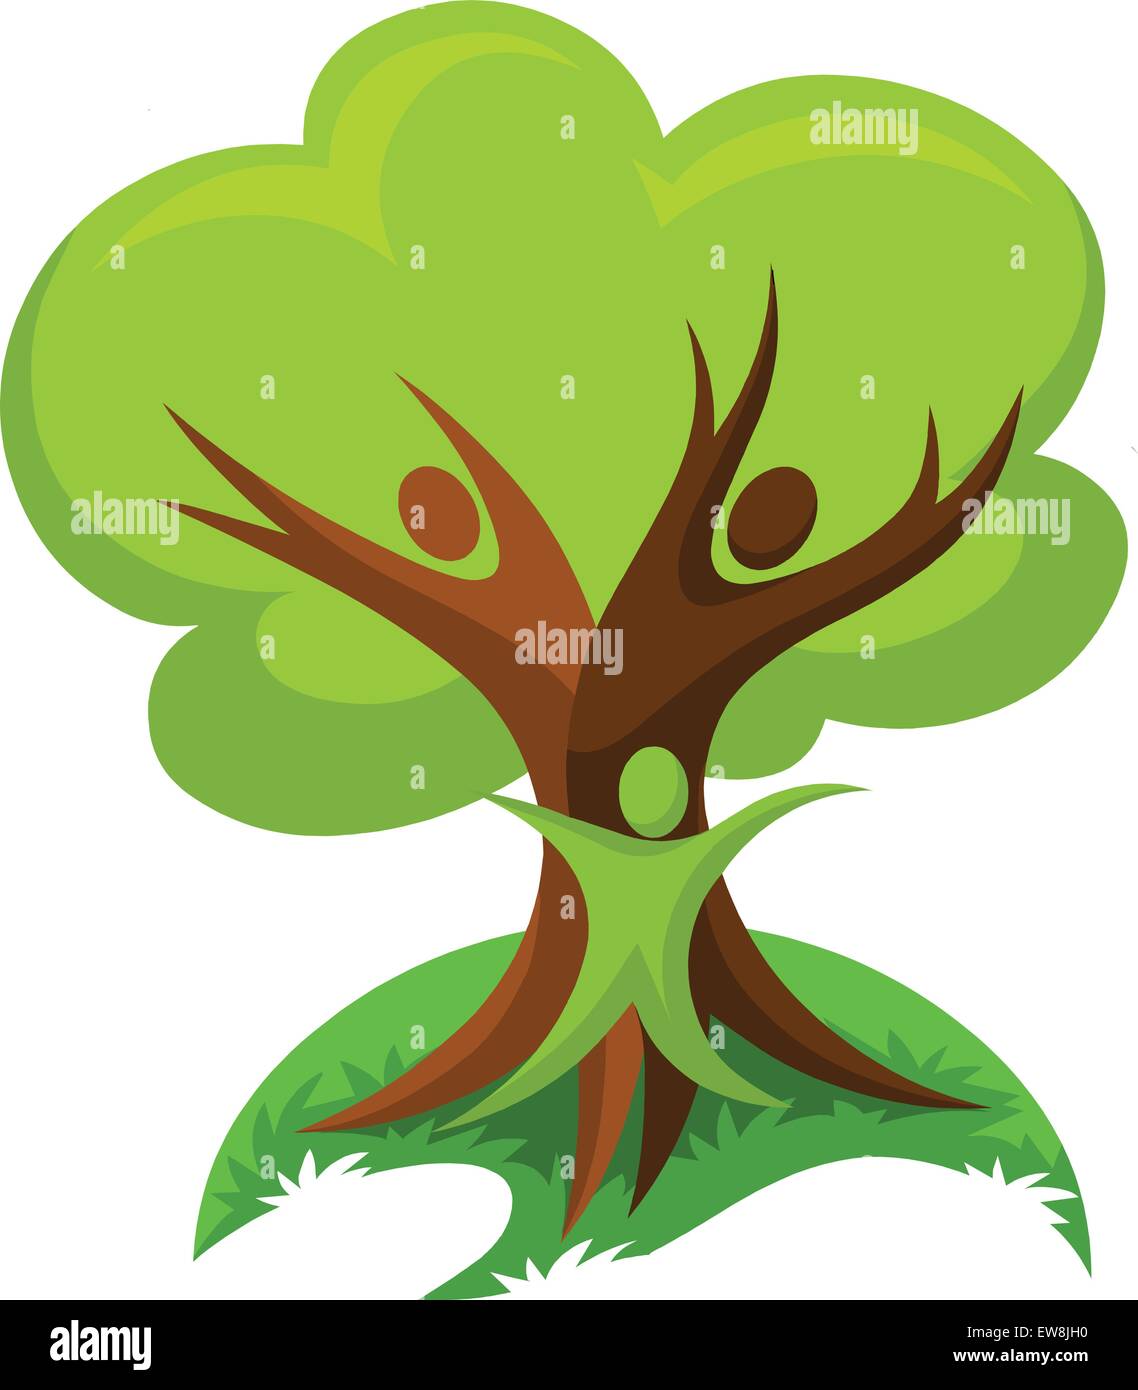 Save the trees Stock Vector Images - Alamy